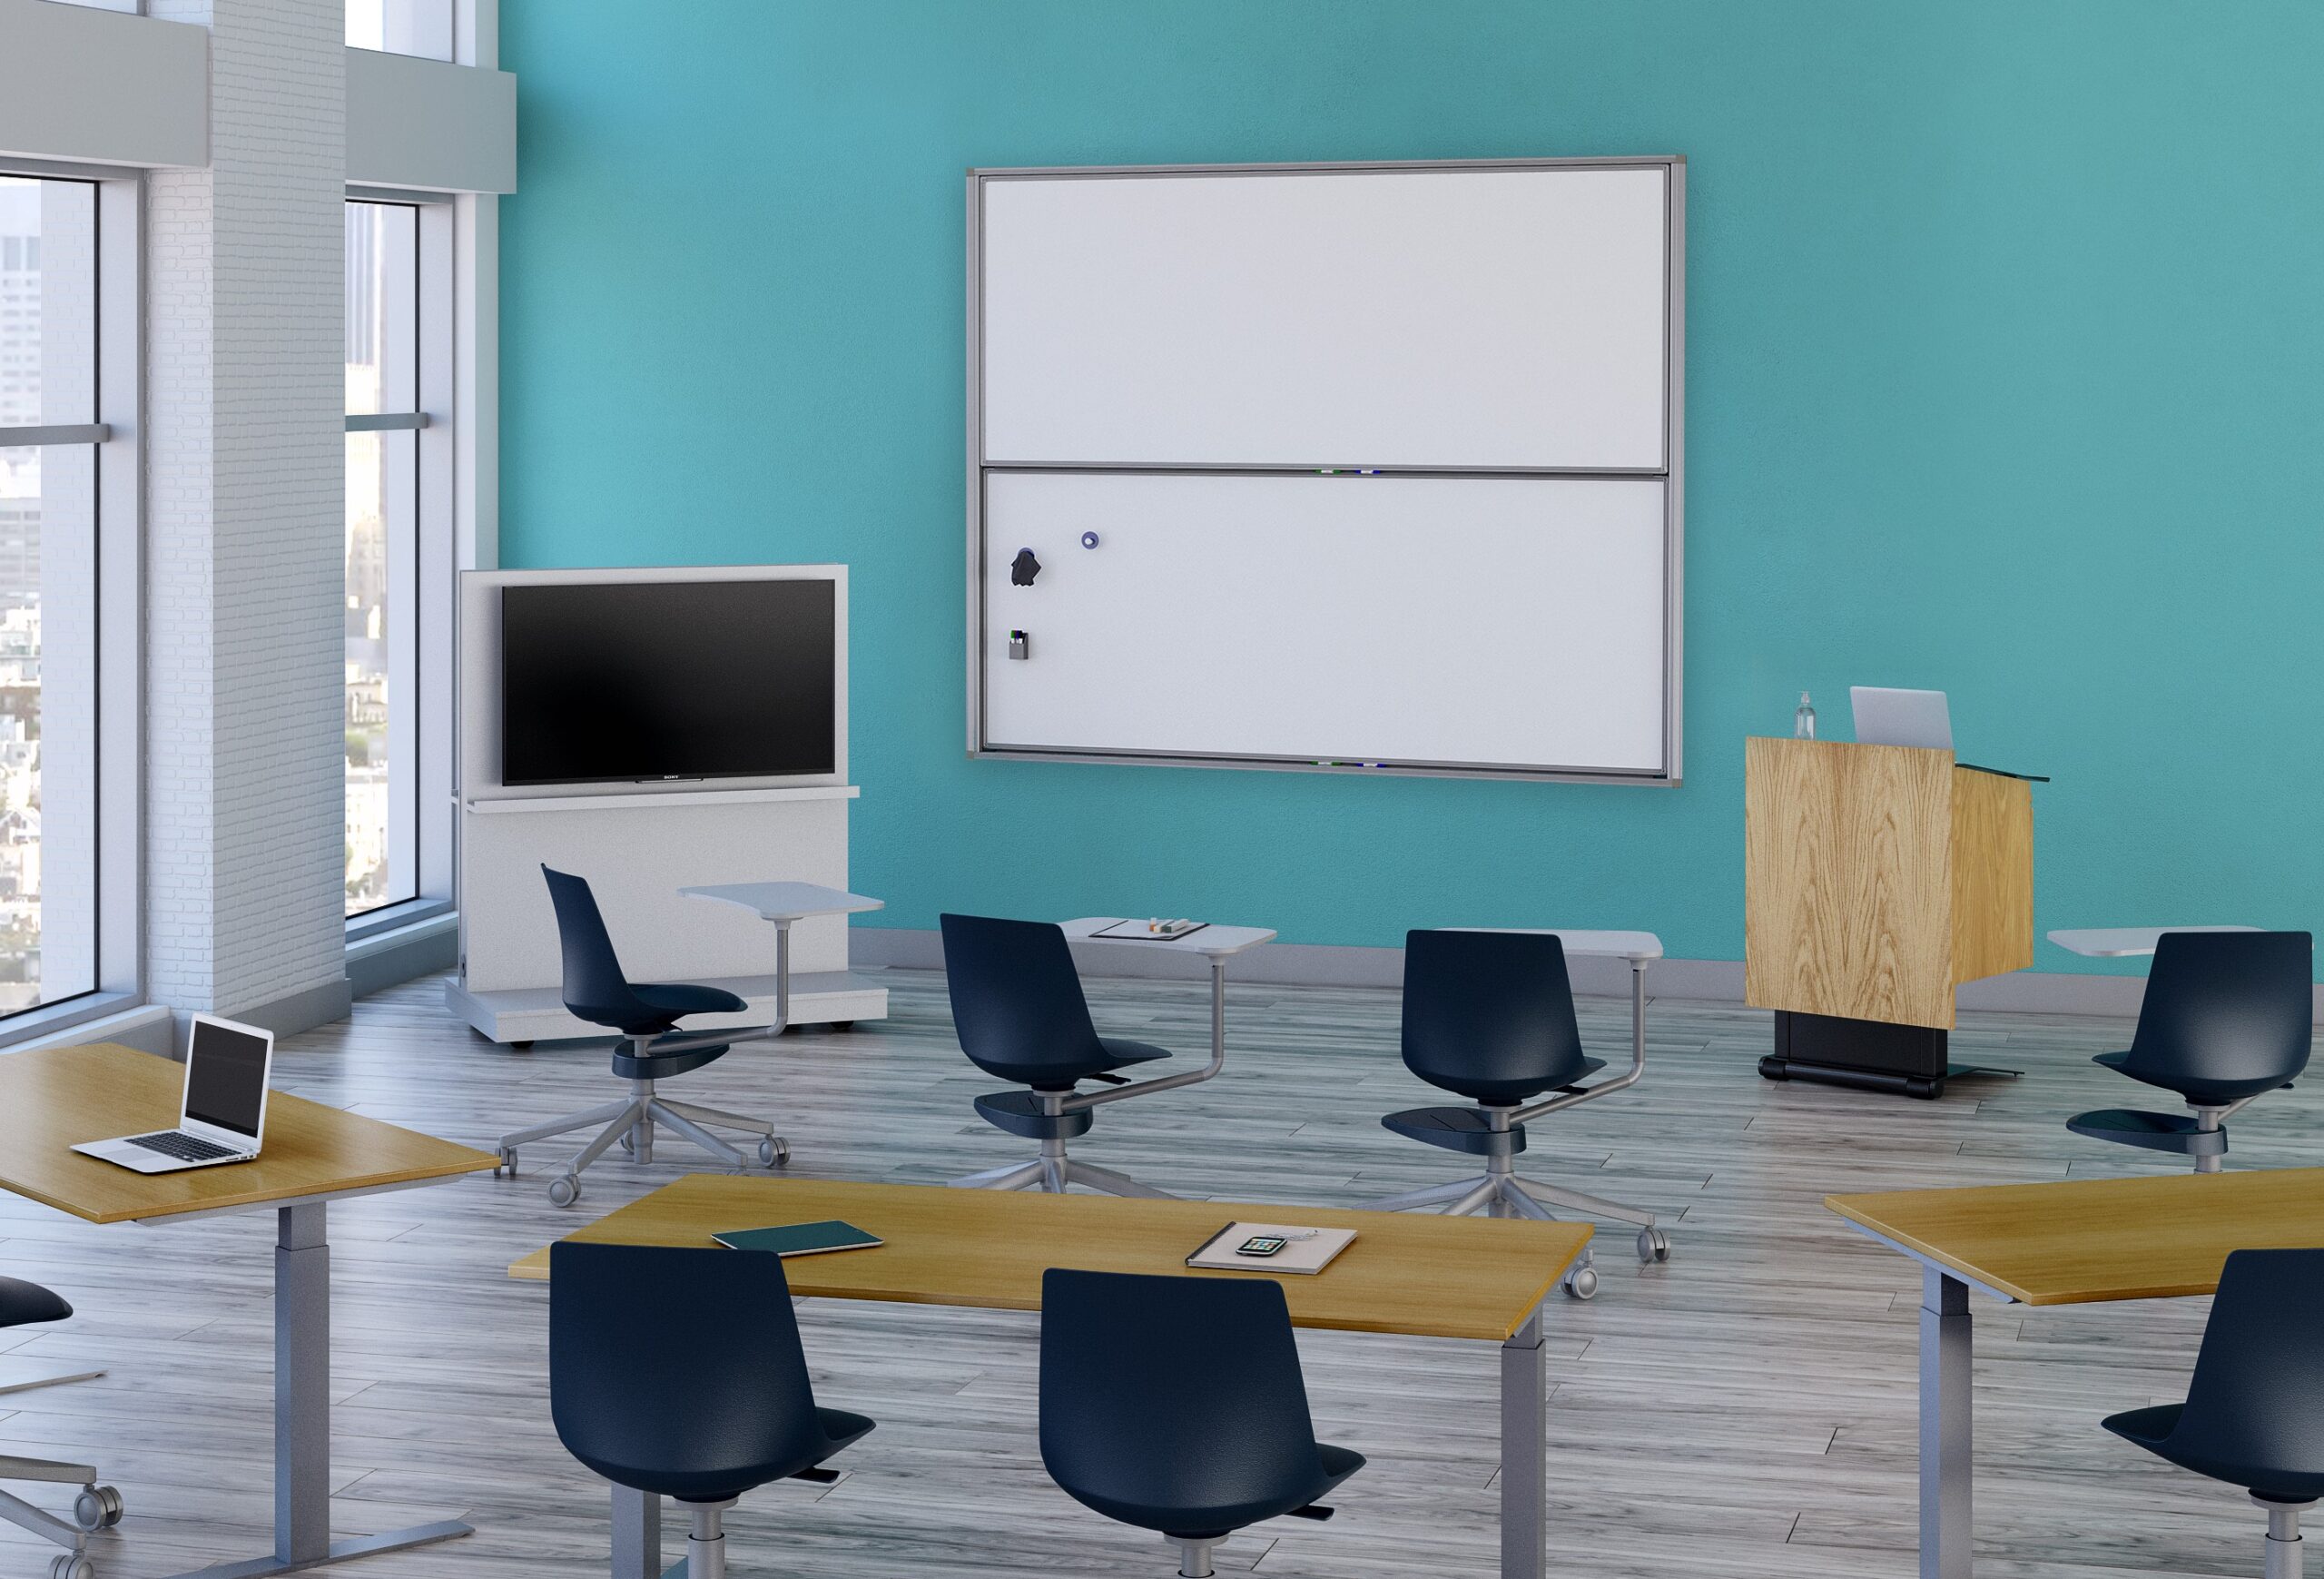 Learning Surfaces Vertical Slider powered by Egan.com